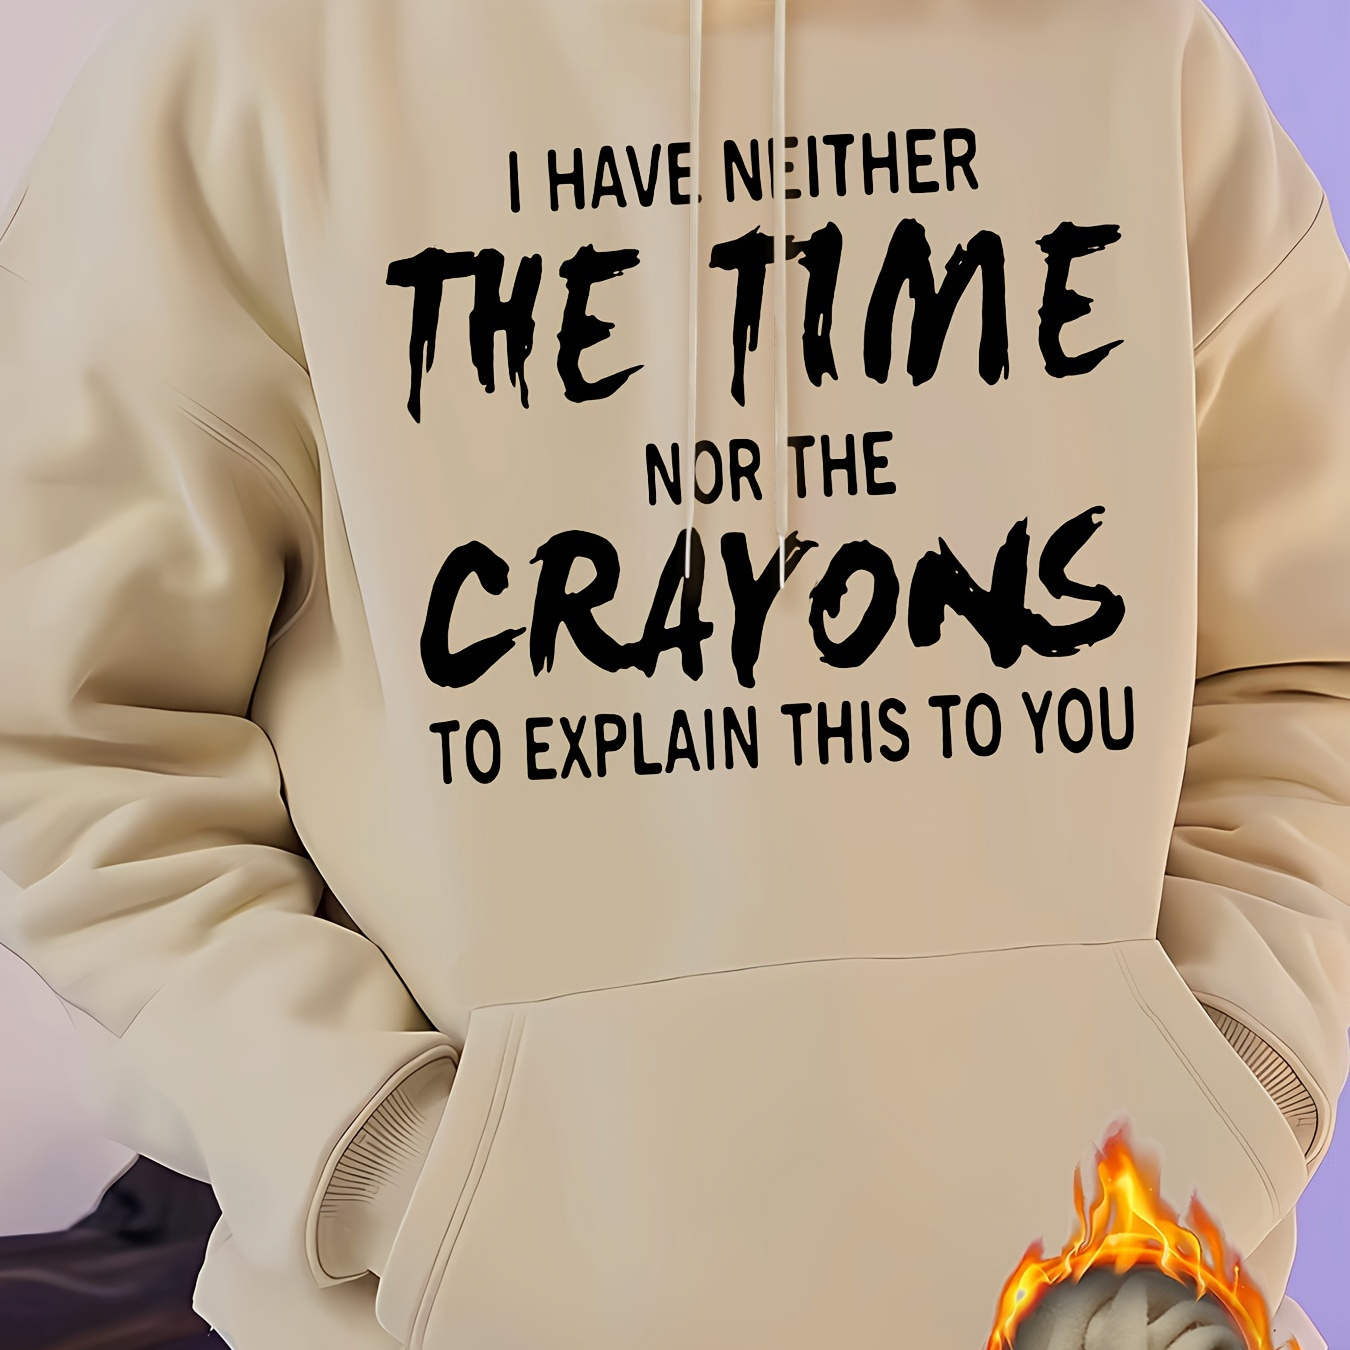 

I Have Neither The 11 Me Nor The Crayons To Explain This To You Print Men's Pullover Round Neck Long Sleeve Hooded Sweatshirt Pattern Loose Casual Top For Autumn Winter Men's Clothing As Gifts